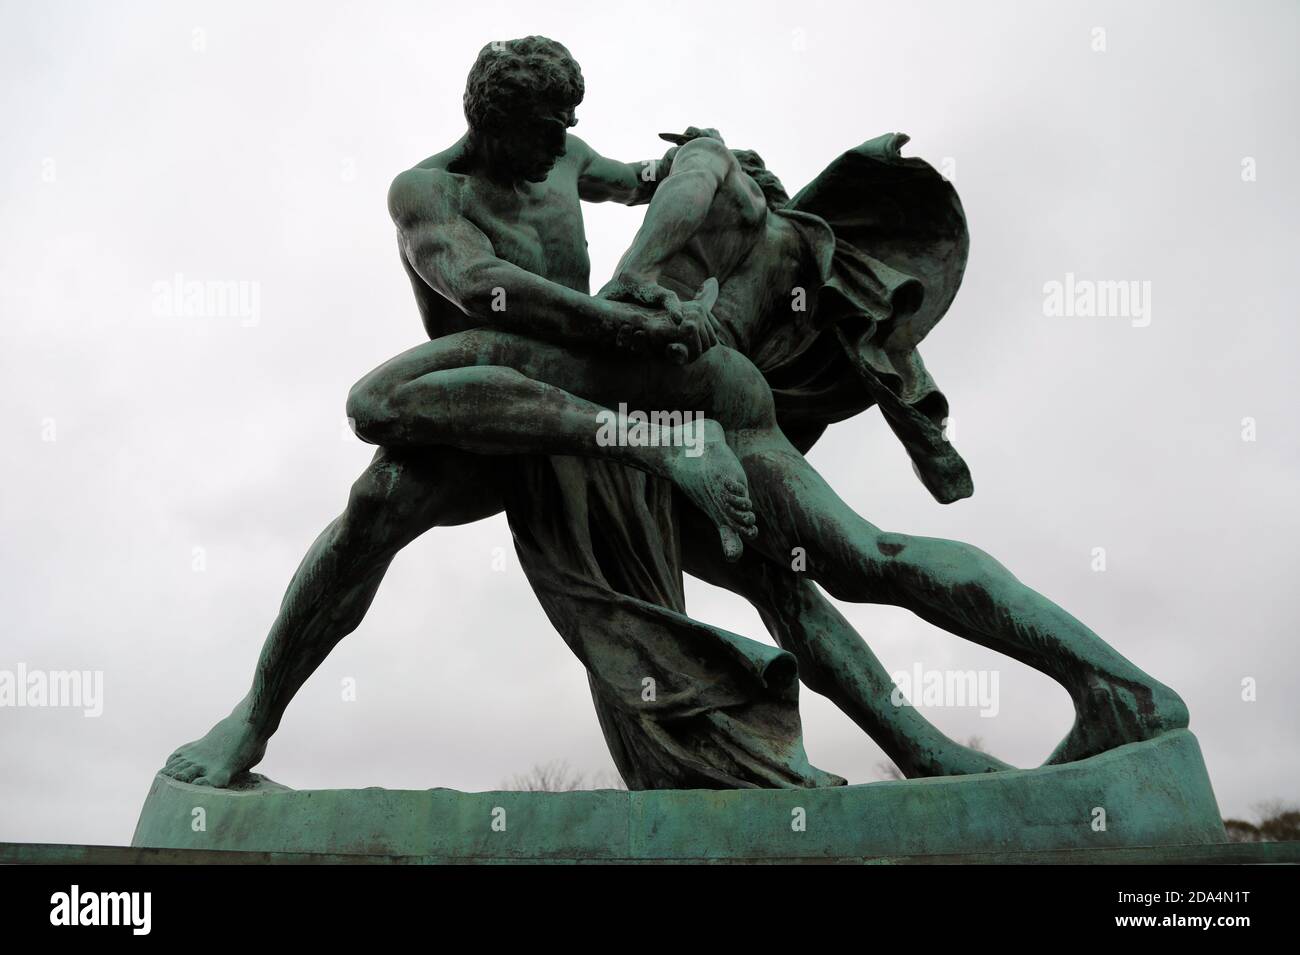 The Knife Wrestlers sculpture by Johan Peter Molin at Gothenburg in Sweden Stock Photo